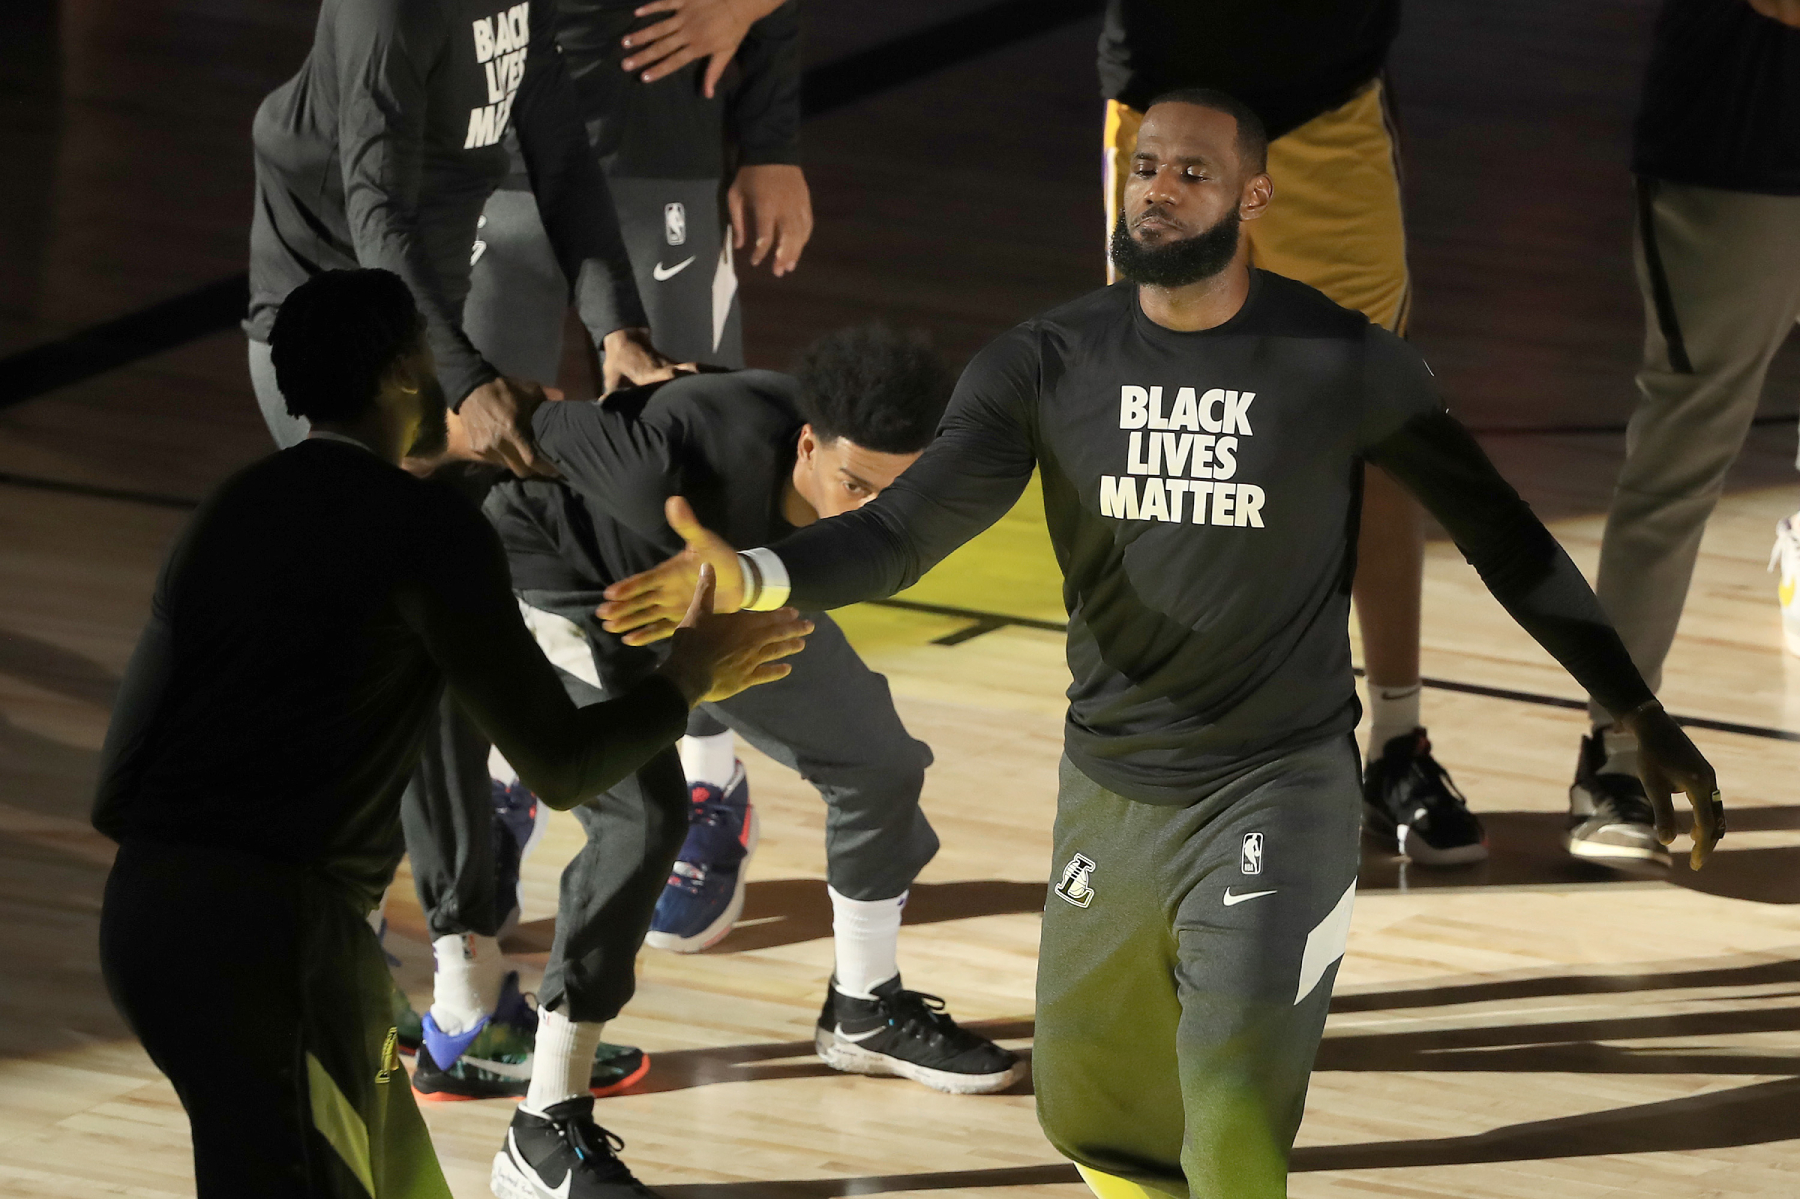 LeBron James and other NBA players knelt during the national anthem recently. Afterward, James sent a powerful message to Colin Kaepernick.